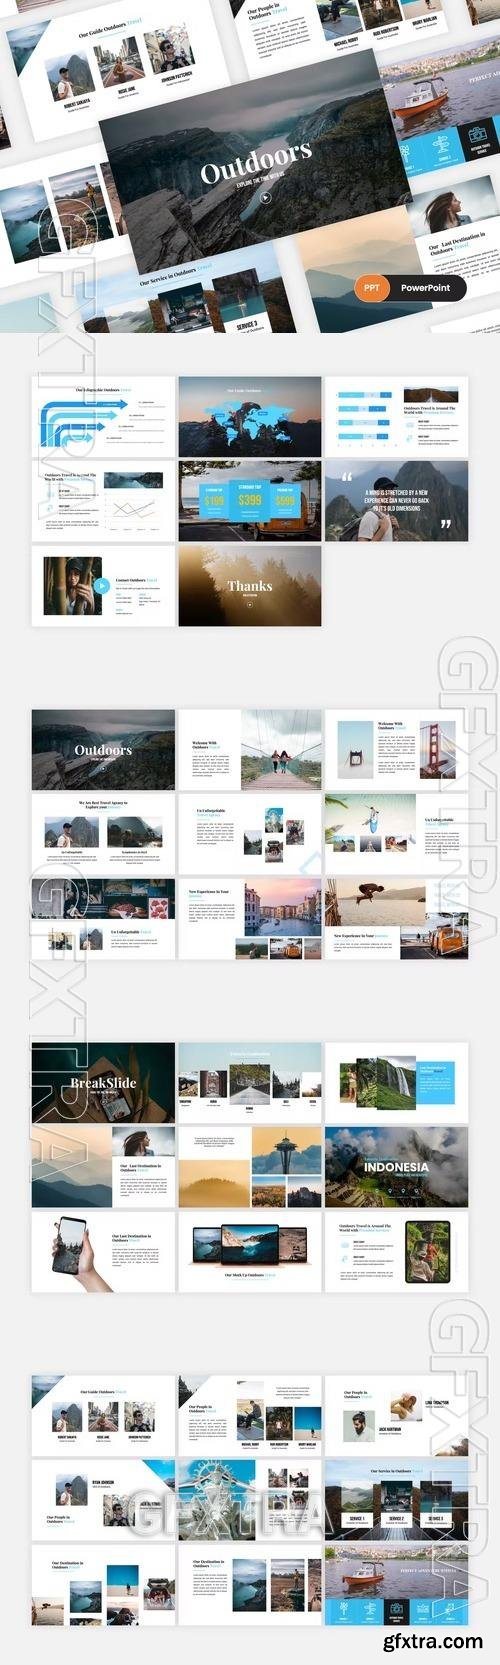 Outdoors - Travel Agency PowerPoint Template